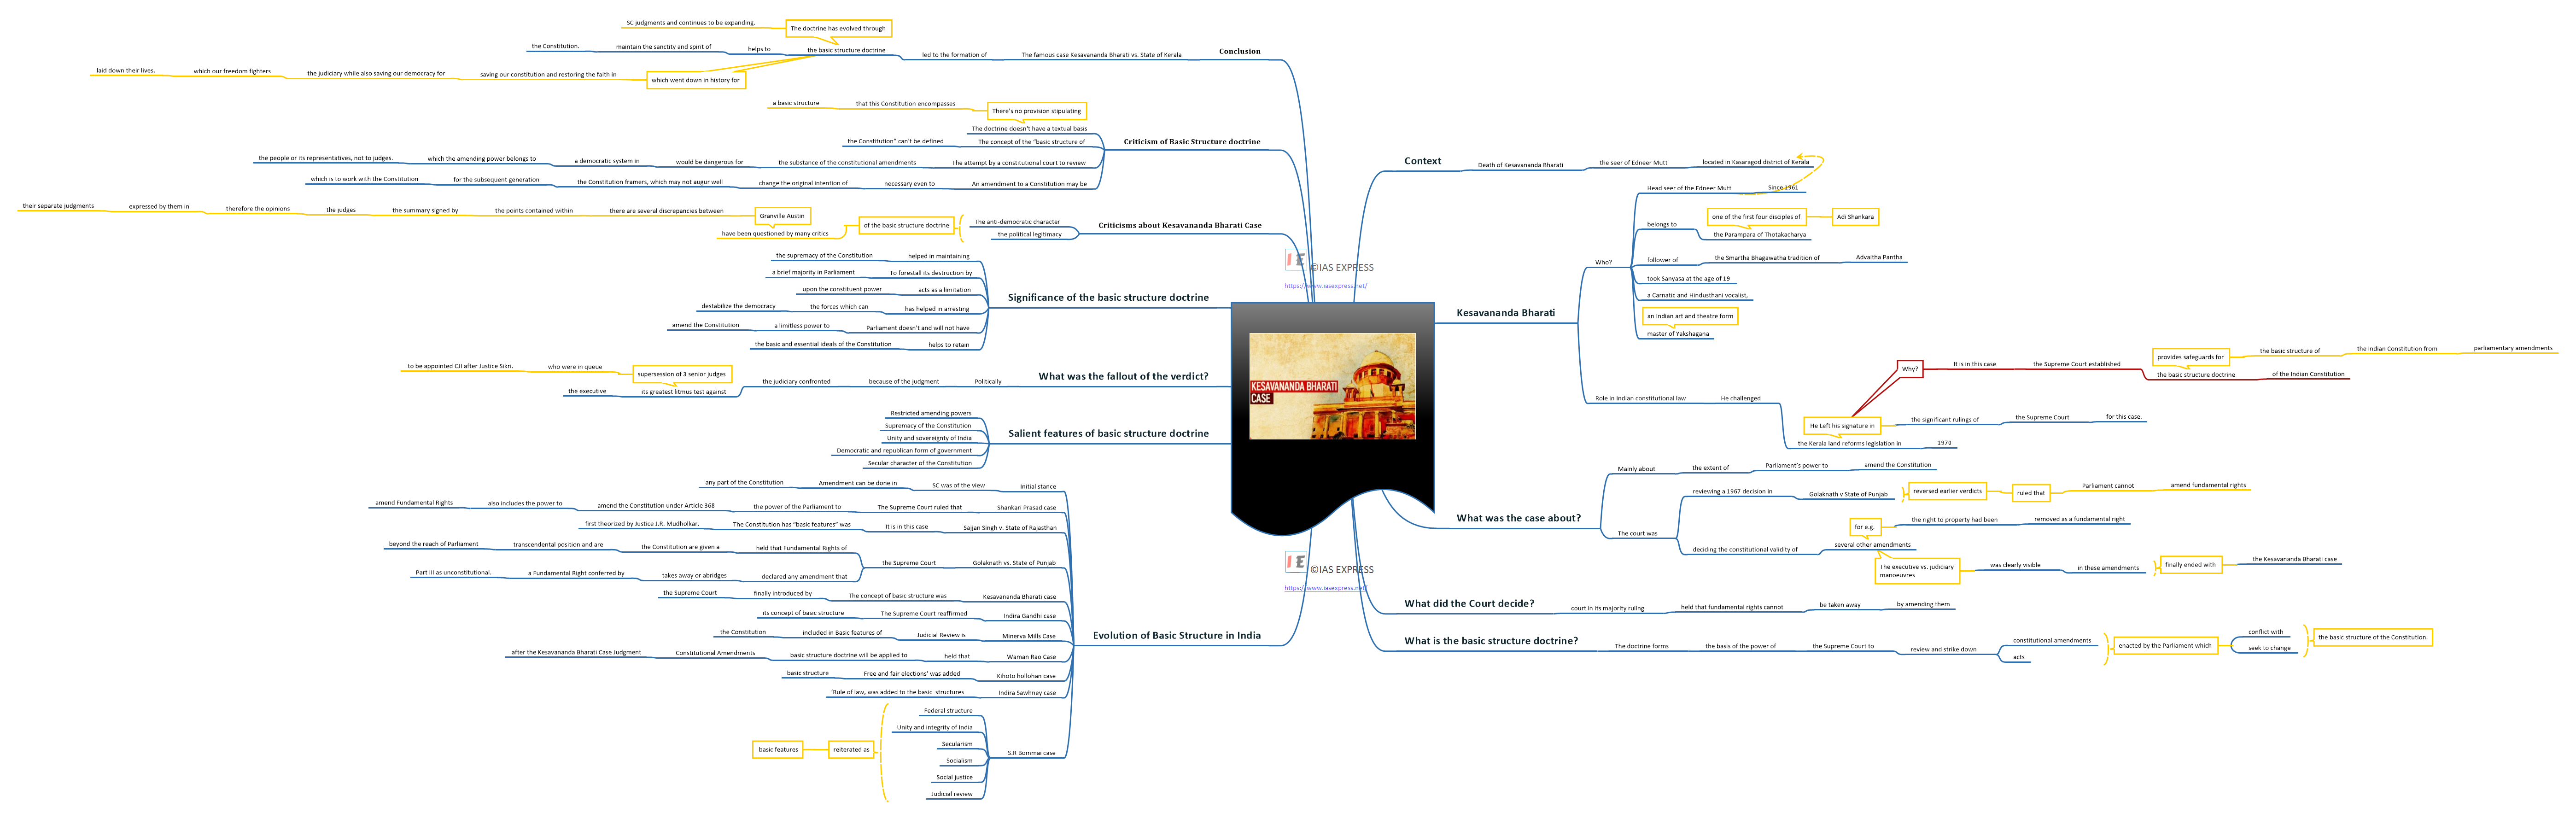 Mind Map of Kesavananda Bharati Case and Basic Structure of Indian Constitution